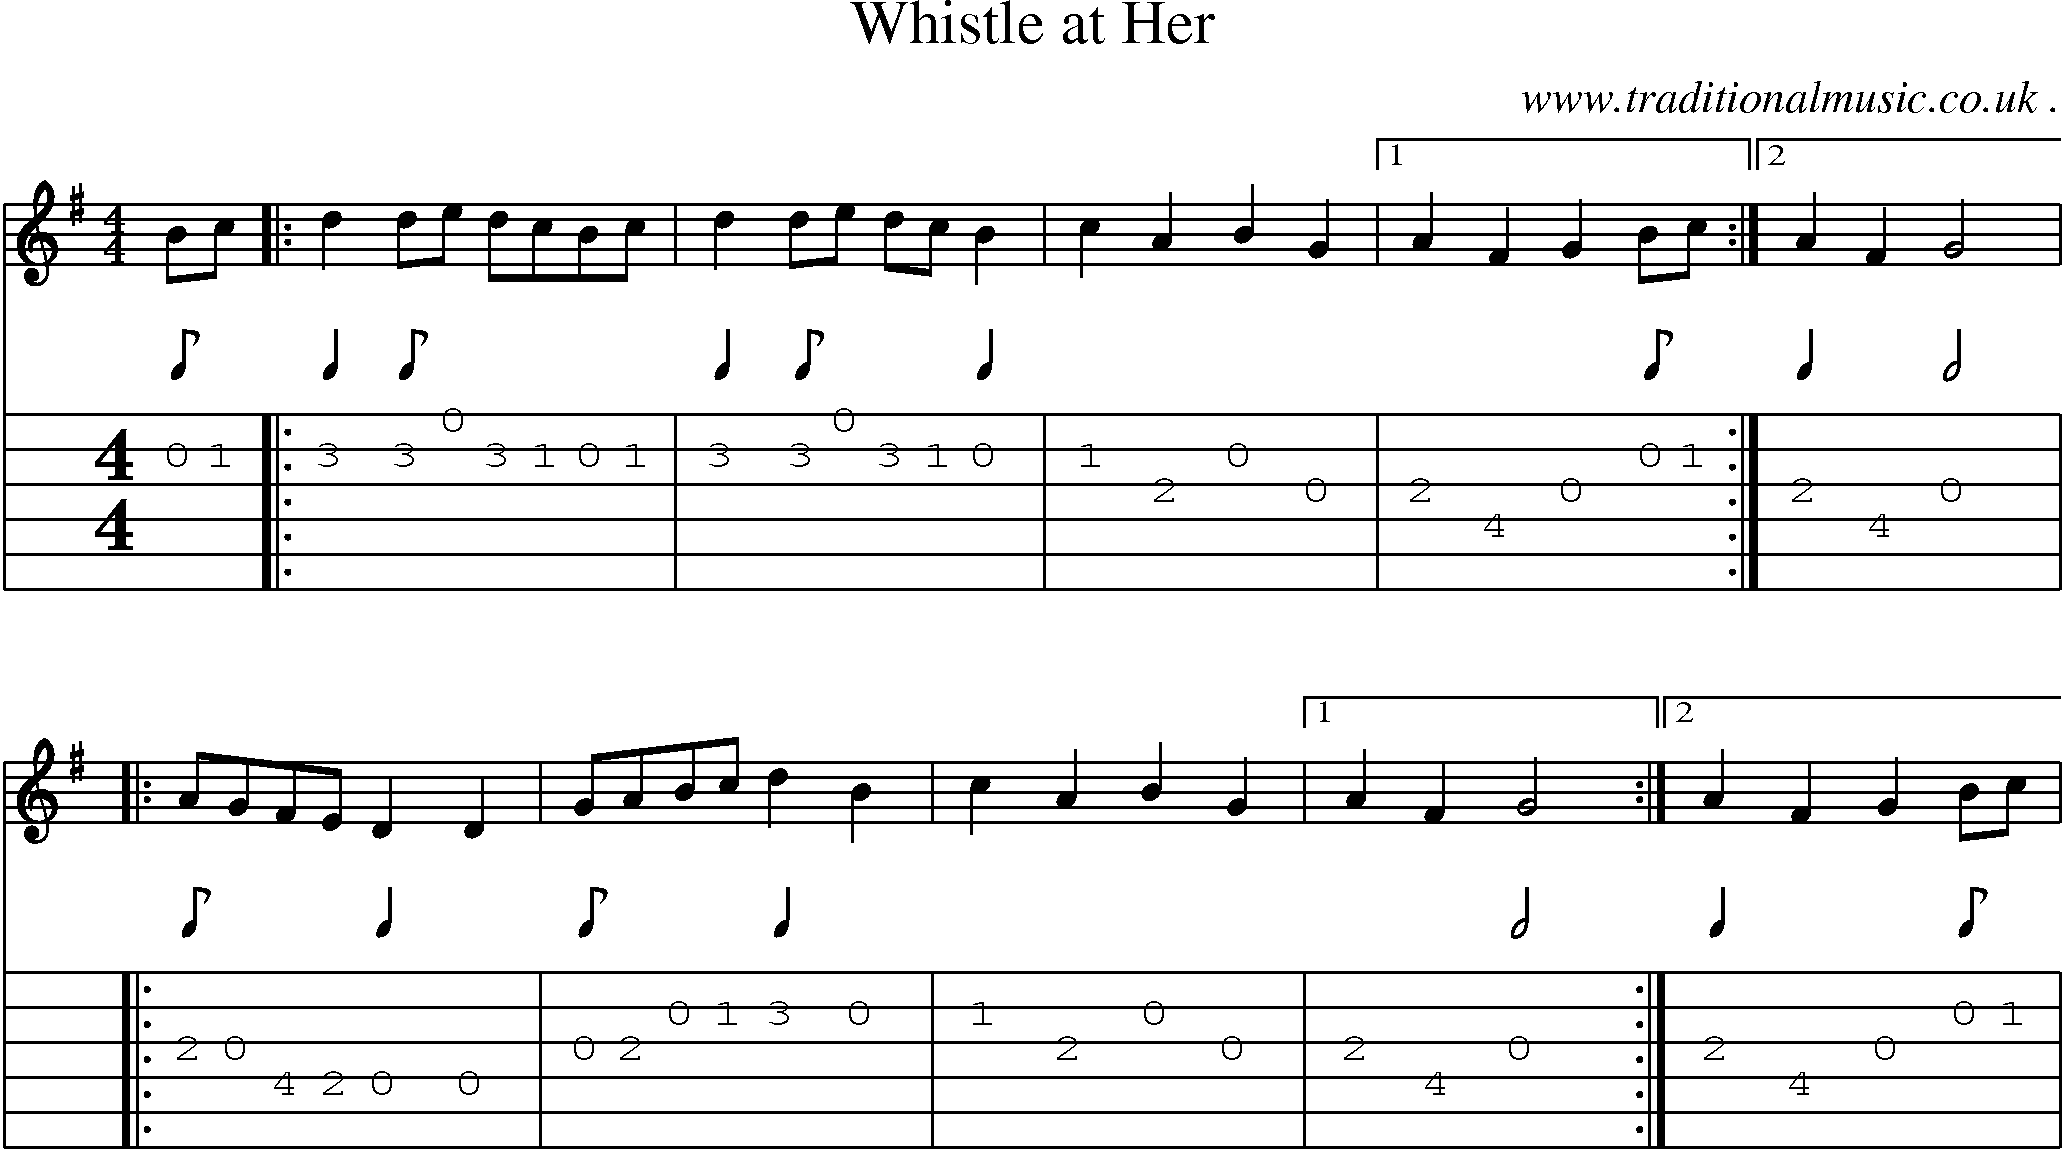 Sheet-Music and Guitar Tabs for Whistle At Her